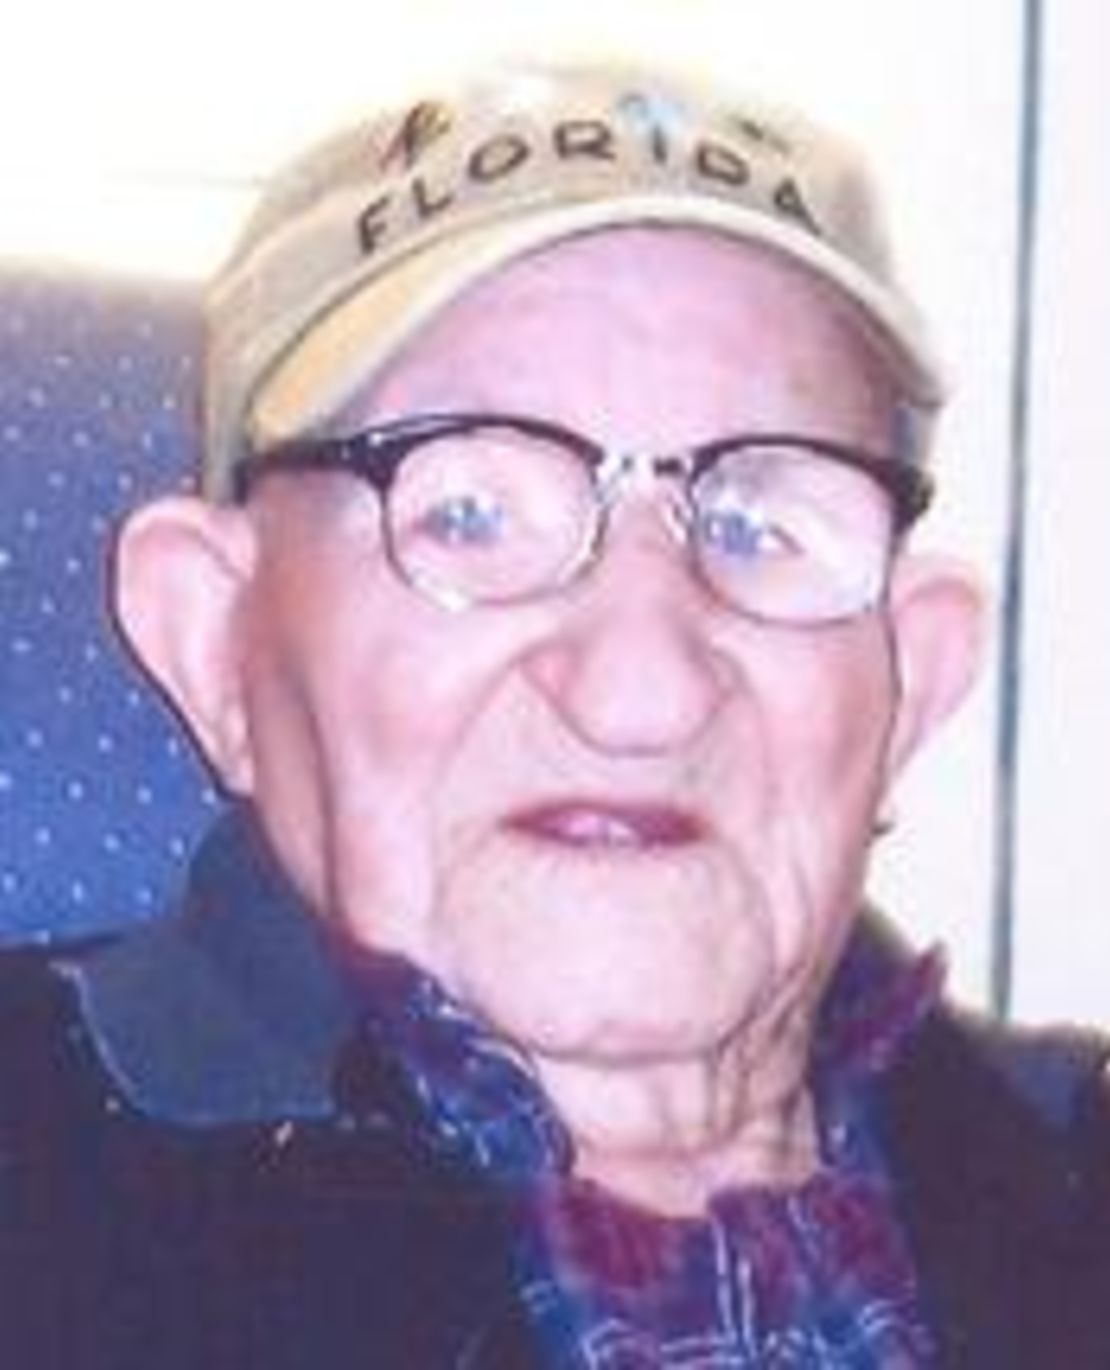 Salustiano "Shorty" Sanchez, recognized by Guinness World Records as the oldest man in world at 112, died on Friday.